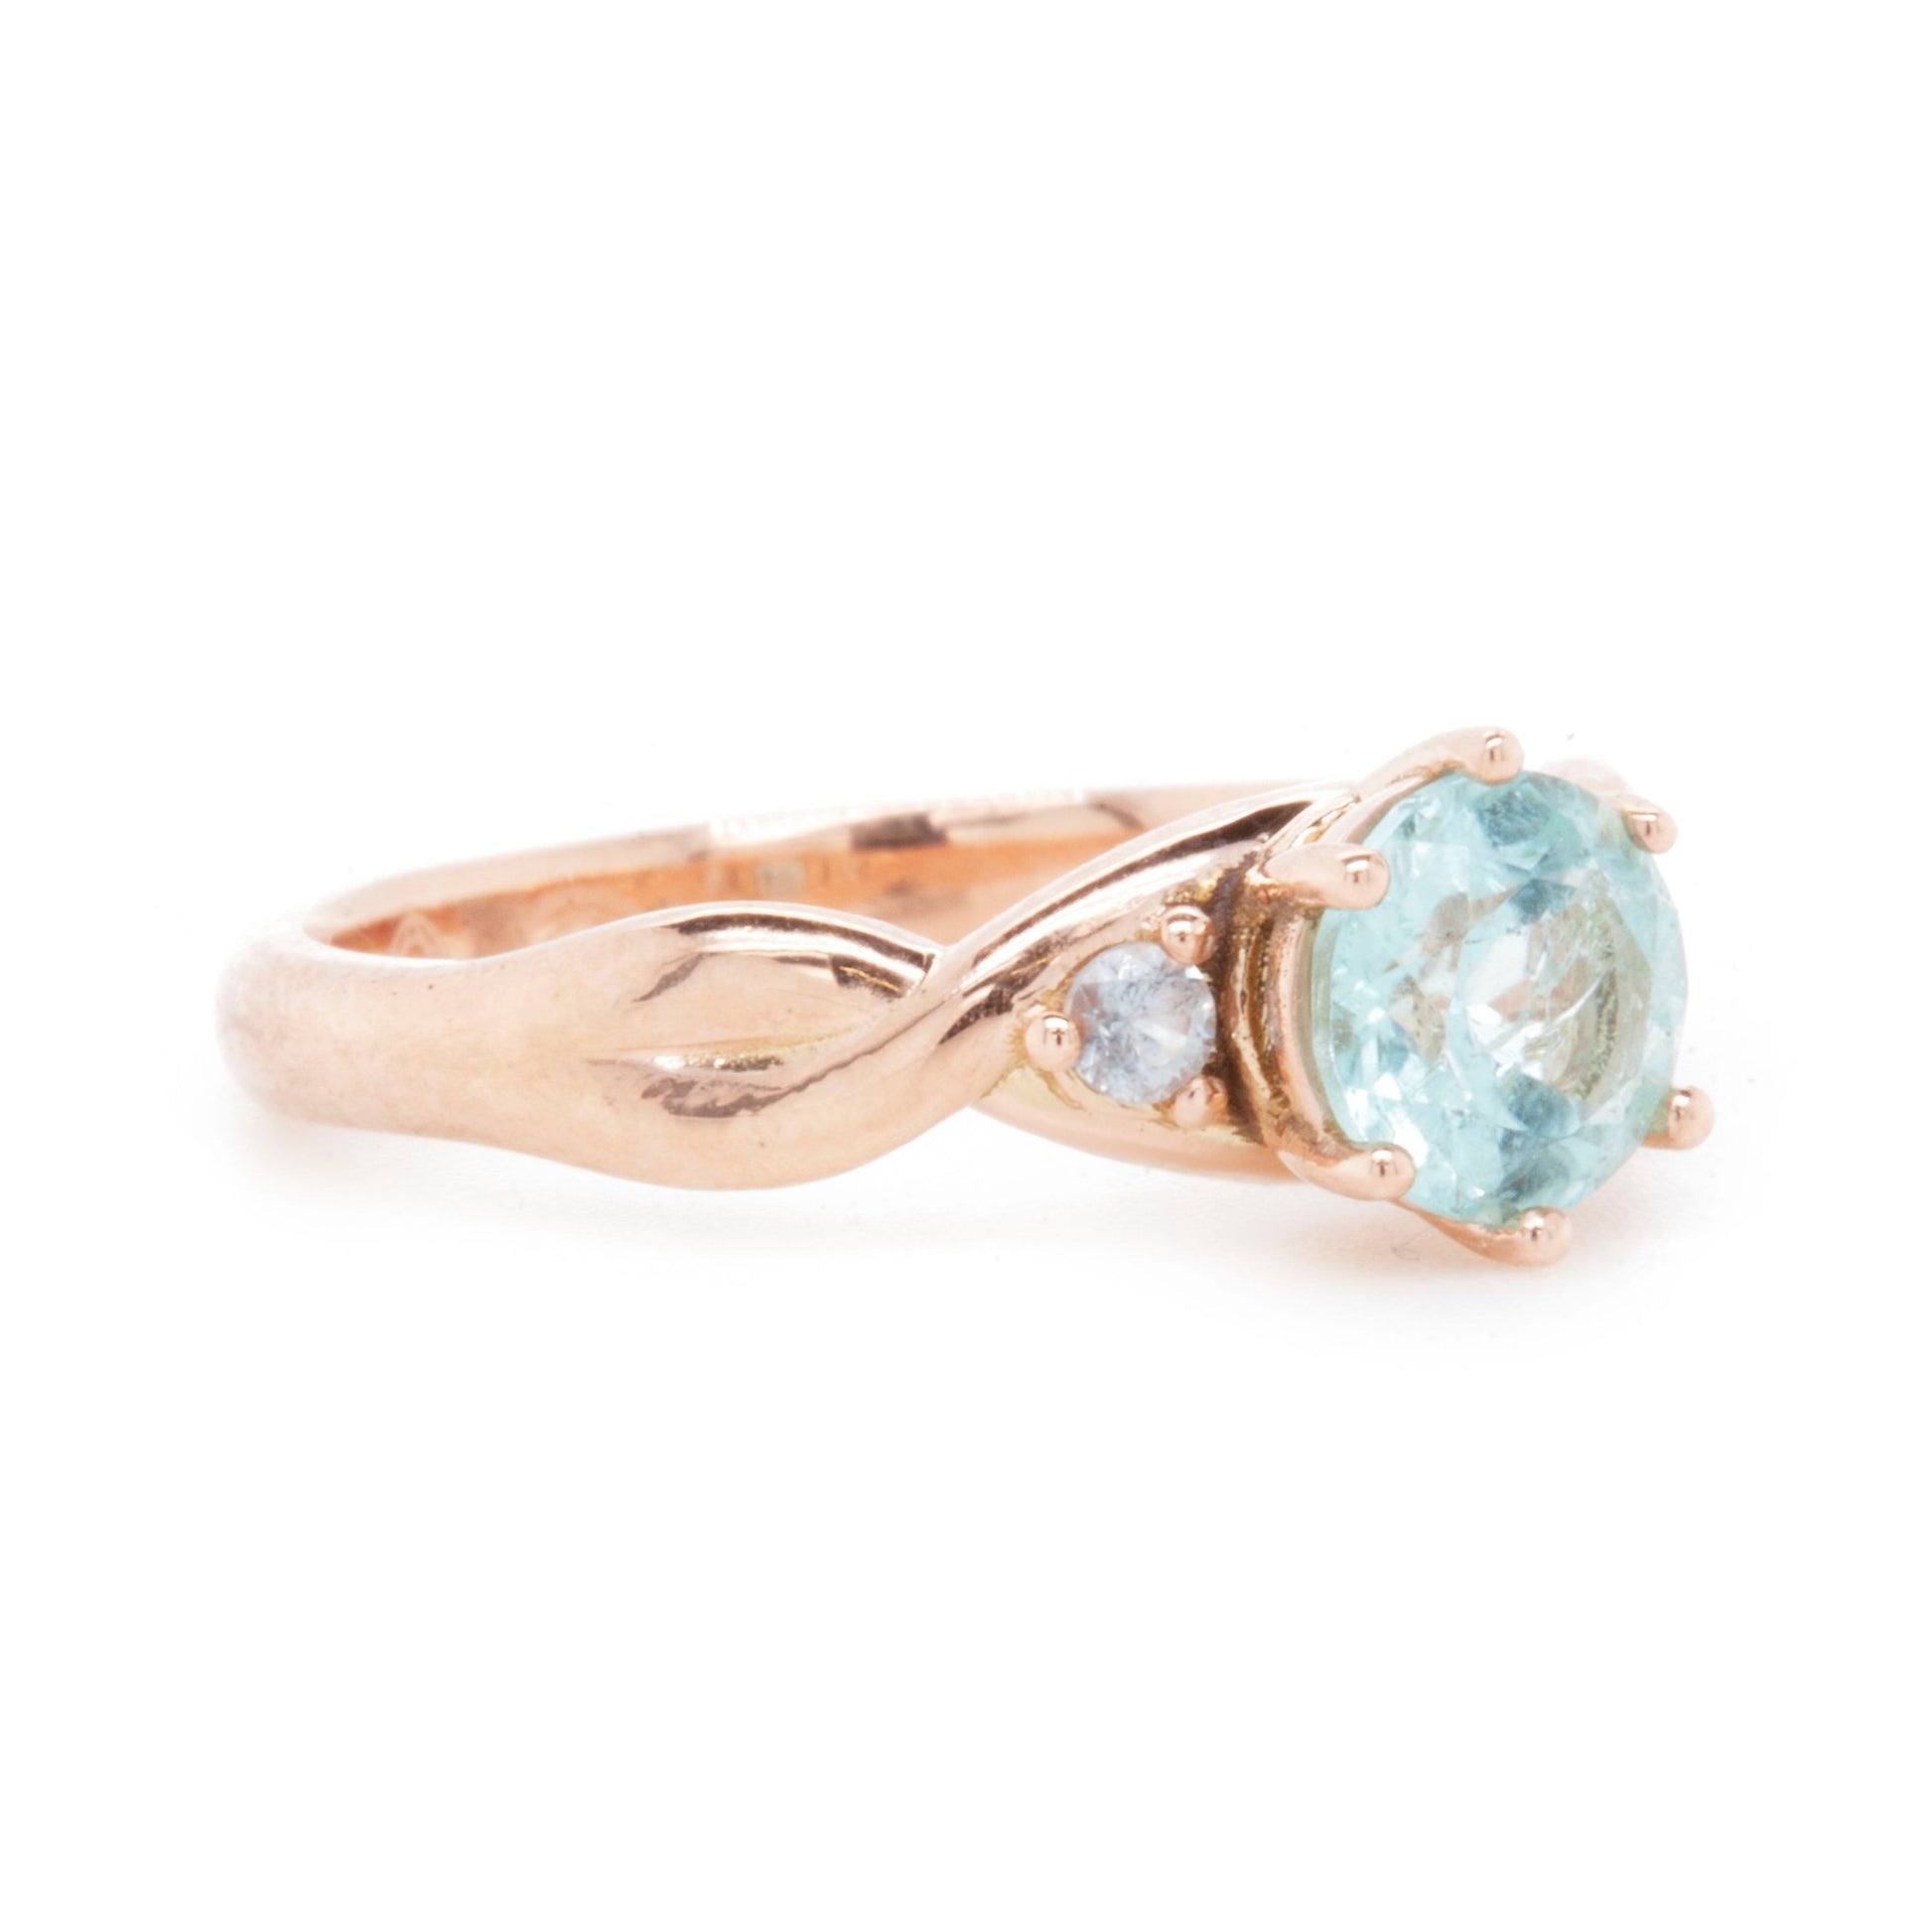 The Fairmined Rose Gold Three Stone Twist Ring (Ready to ship in size 6.25) - W.R. Metalarts